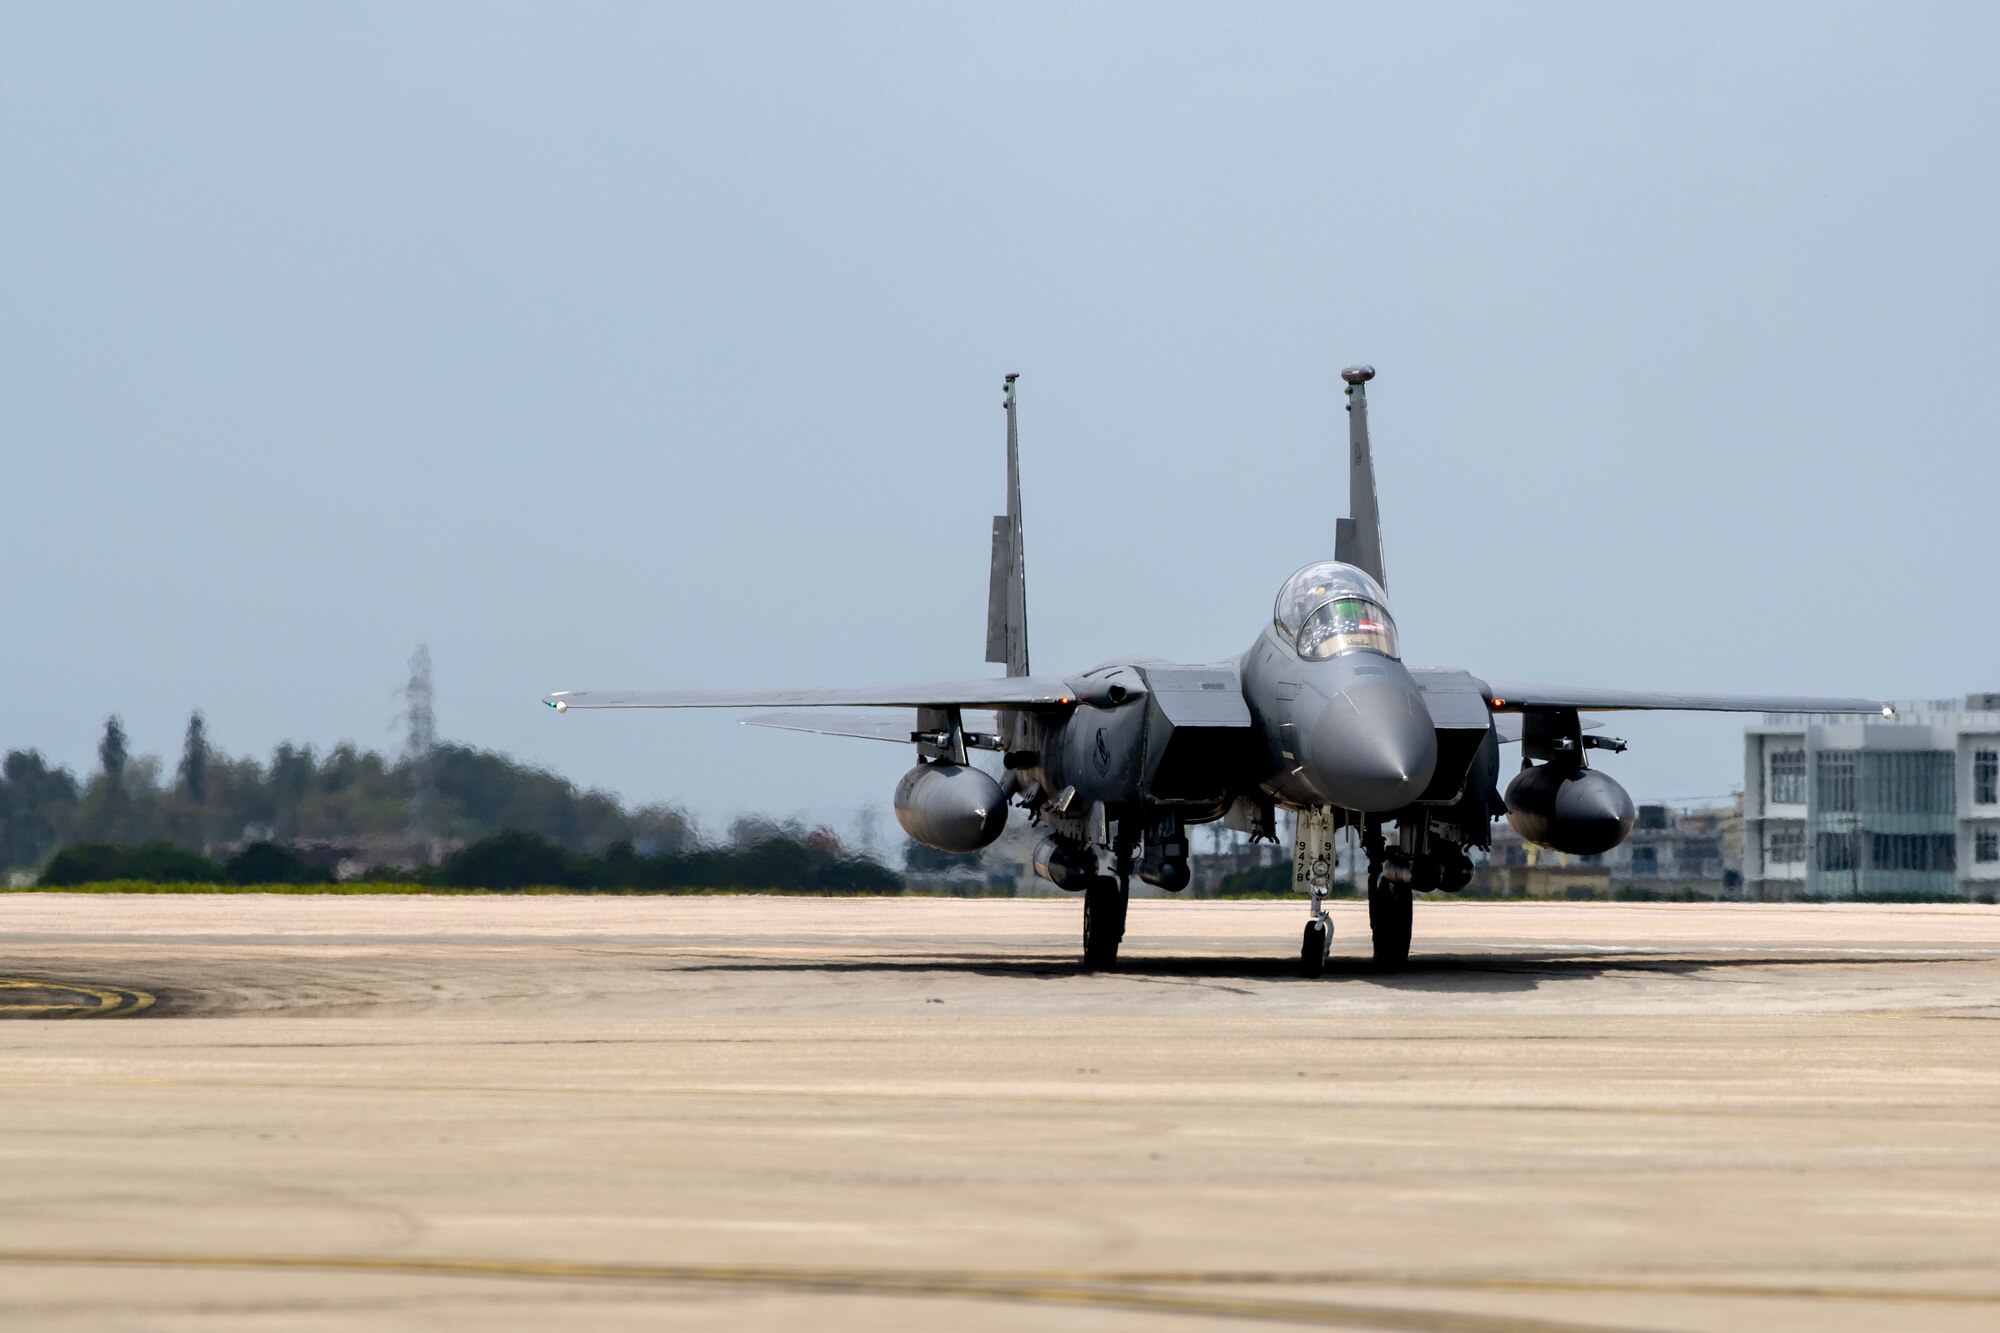 An F-15E Strike Eagle assigned to the 336th Fighter Squadron arrives at Kadena Air Base, Japan, April 8, 2023. The Strike Eagle will work in conjunction with F-35A Lightning II aircraft deployed from Eielson Air Force Base and remaining F-15C/D Eagles at Kadena Air Base to ensure continued steady-state fighter capabilities in the region. (U.S. Air Force photo by Senior Airman Jessi Roth)